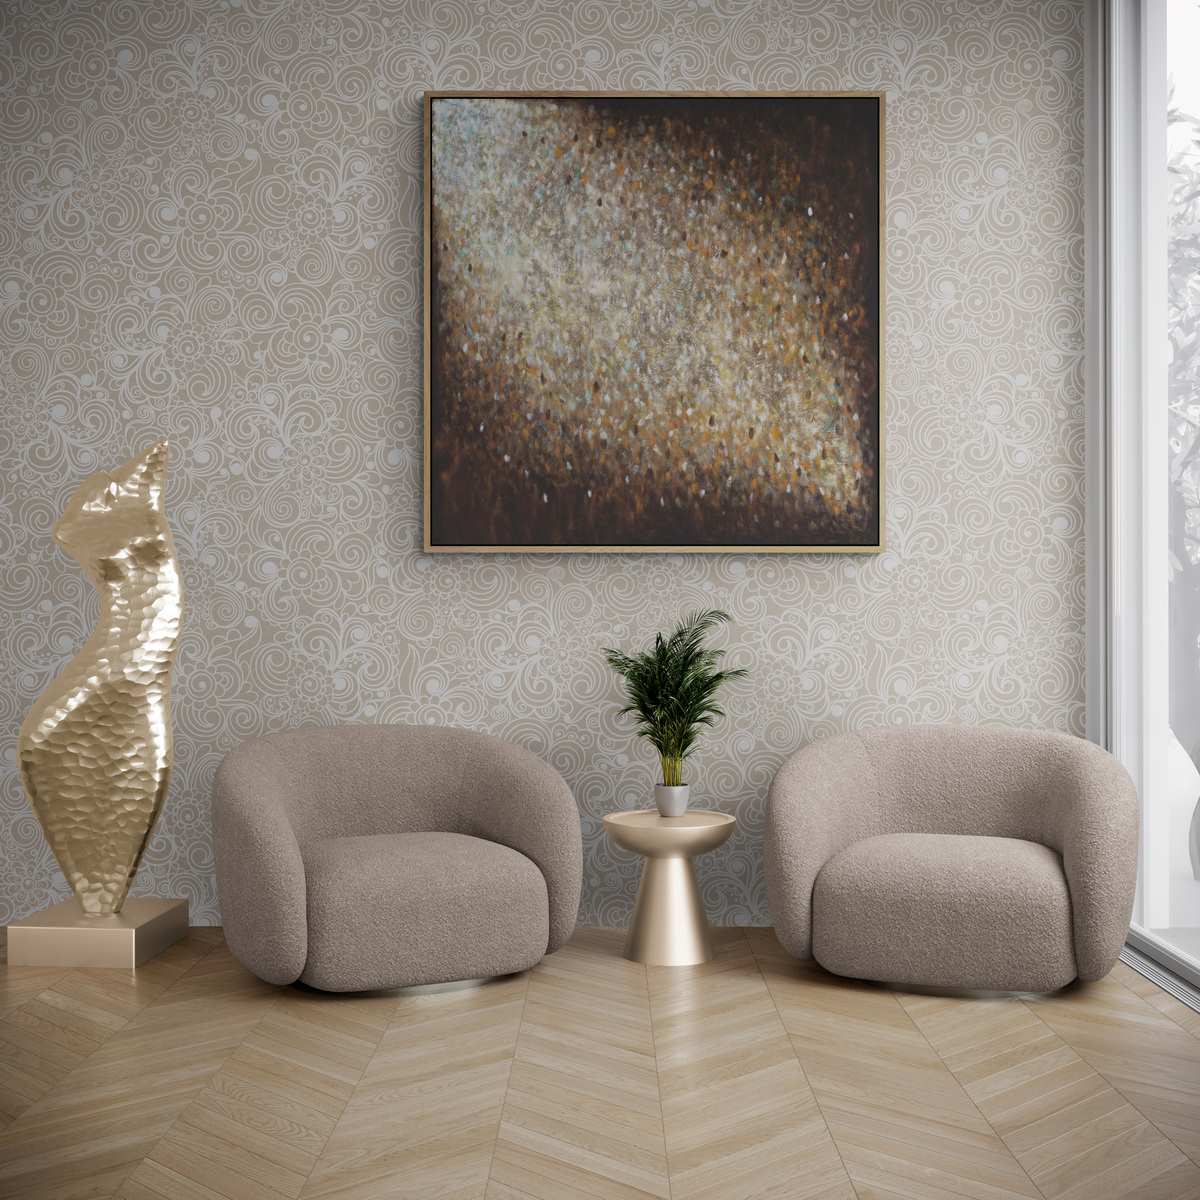 All That Glitters 2 - Limited Edition Print Square